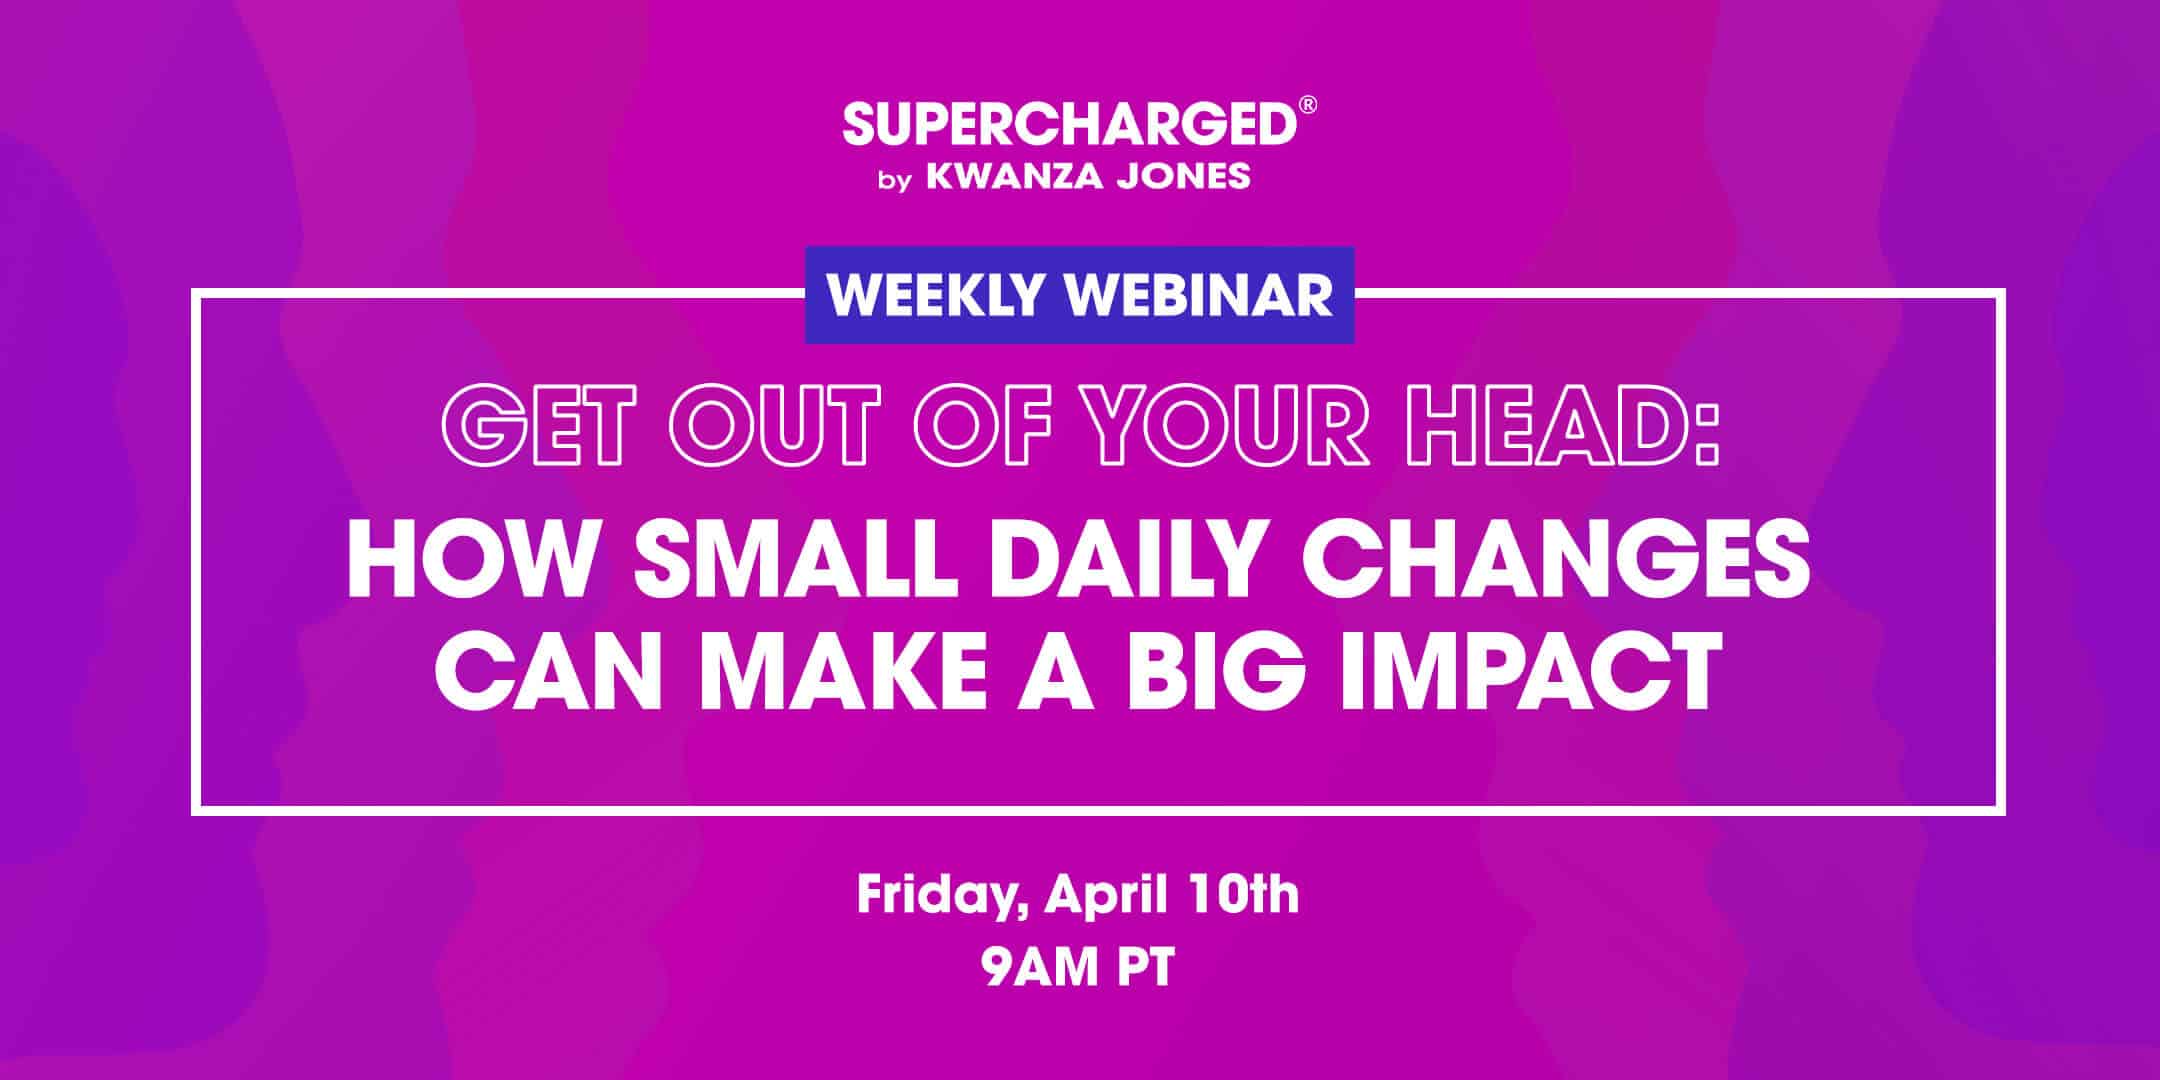 SBKJ Weekly Webinar - Get Out of Your Head: How Small Daily Changes Can Make A Big Impact